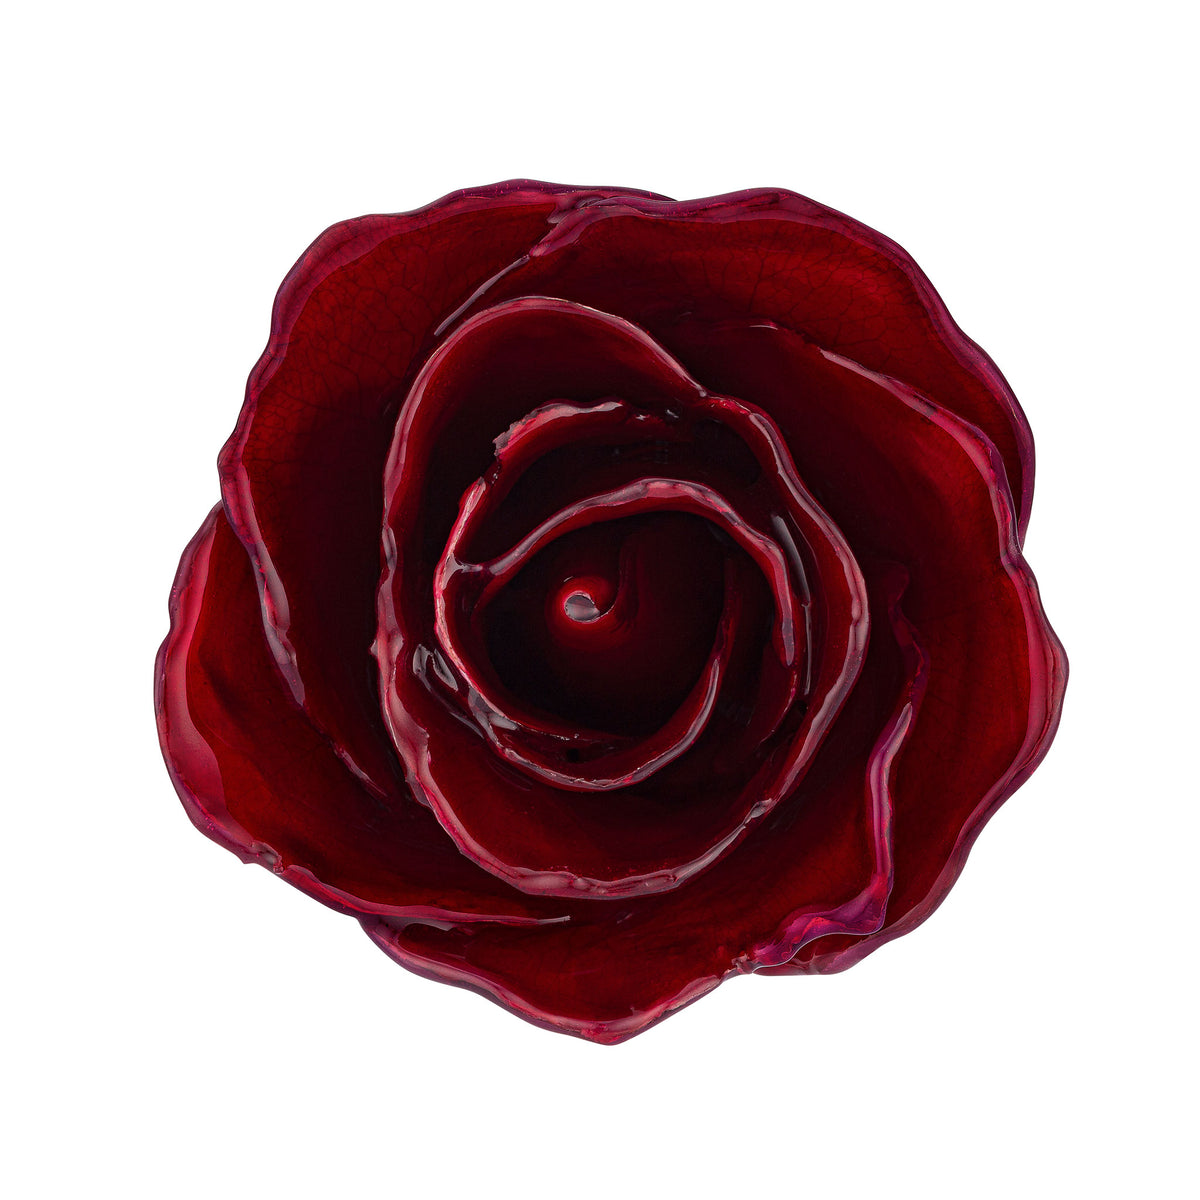 Natural (Green Stem) Forever Rose with Deep Red, Burgundy Colored Petals. View of Stem, Leaves, and Rose Petals. This a Forever Rose without any gold or other precious metals on it. view from top.